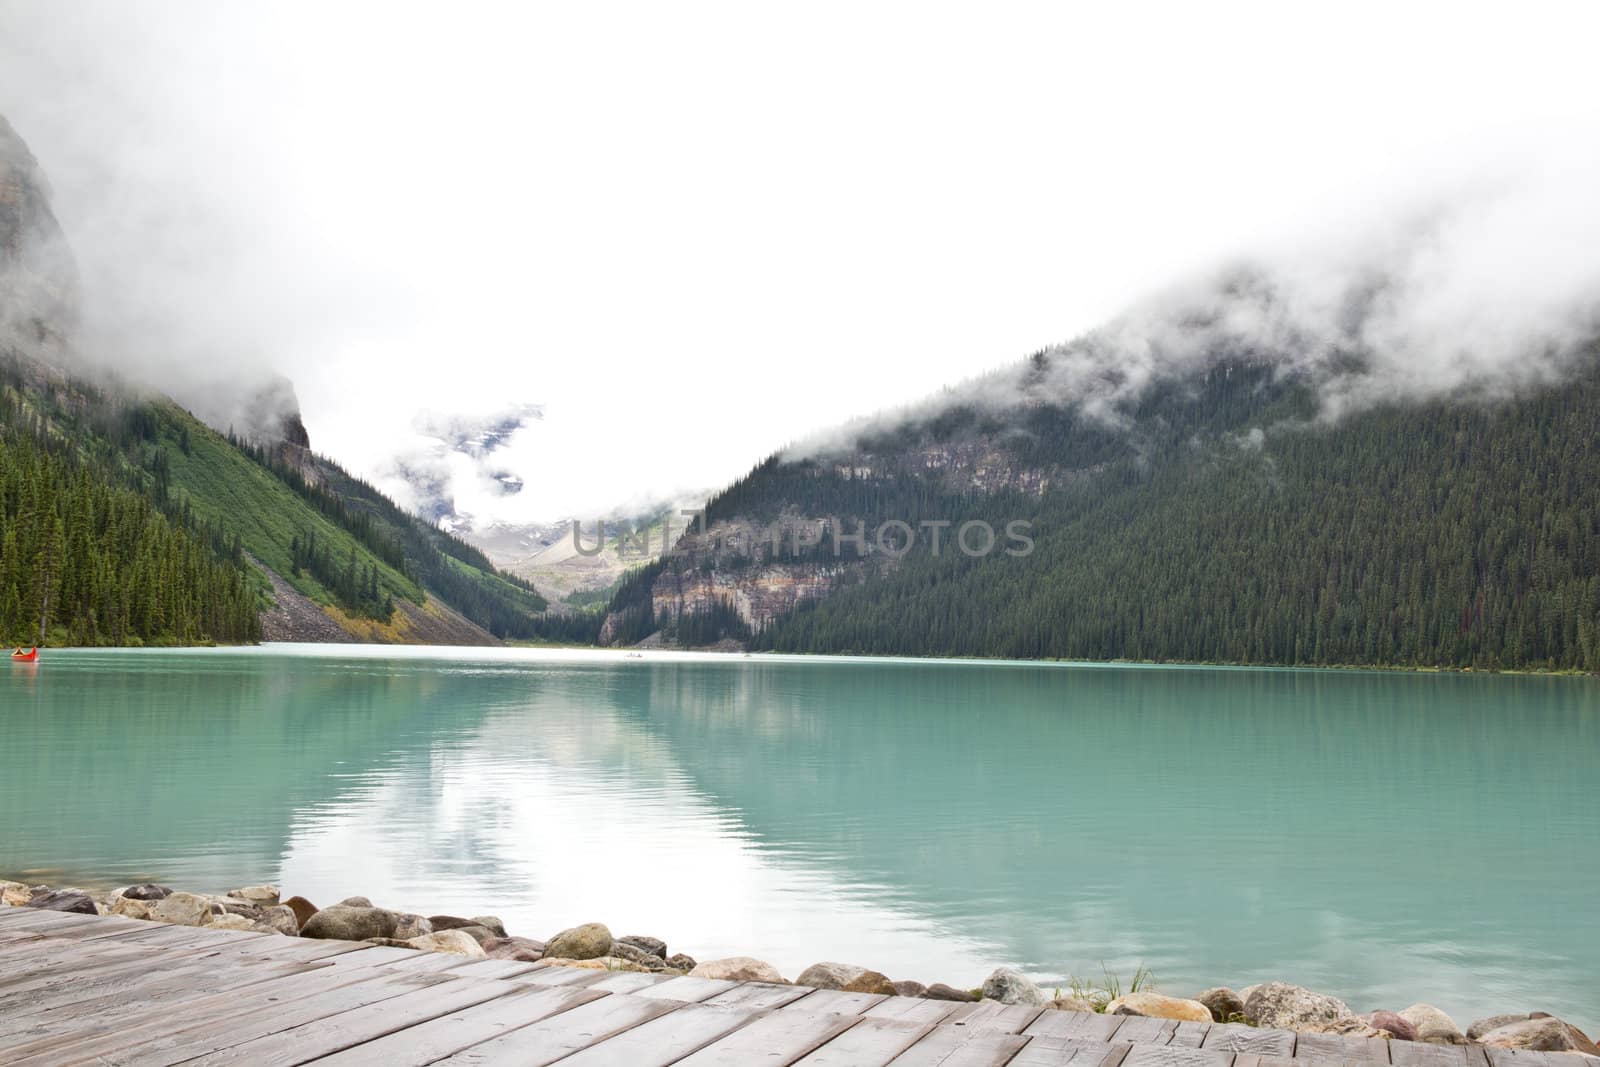 The beautiful turquoise colored Lake Louis against the backdrop of the majestic mountains of the Canadian Rockies partially covered with fog